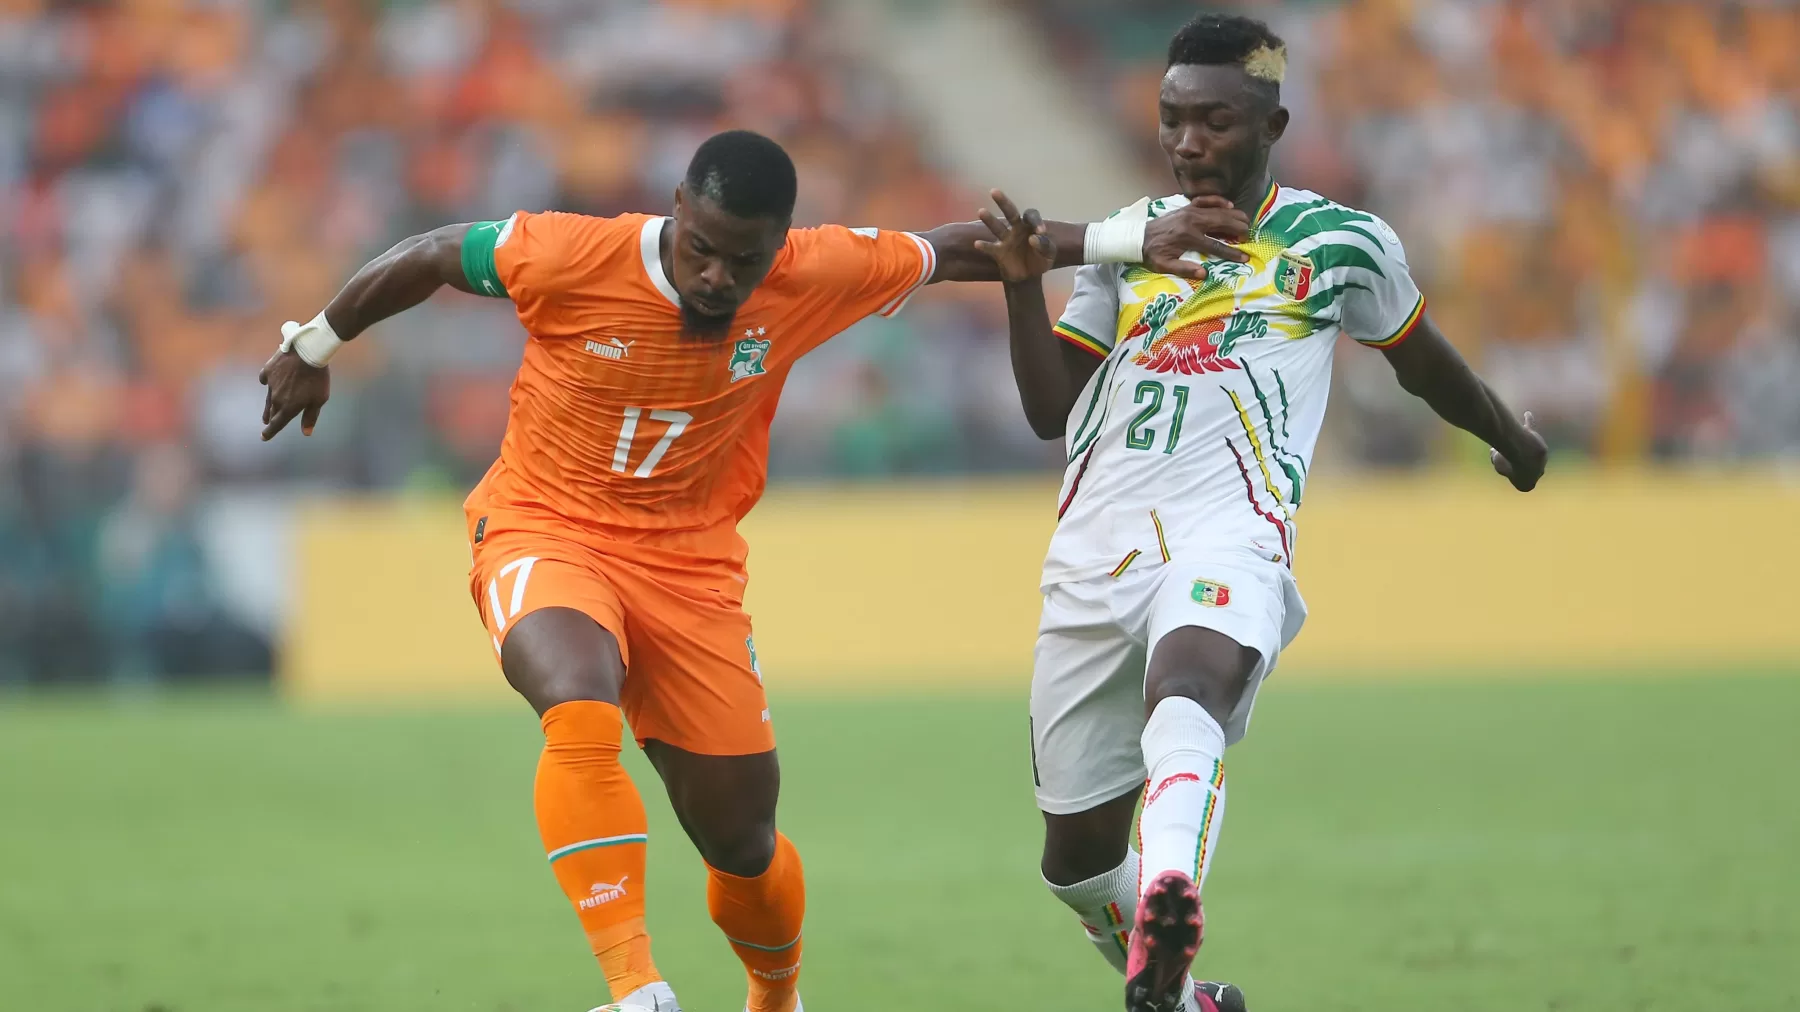   Ivory Coast secure AFCON semi-final spot after dramatic win   